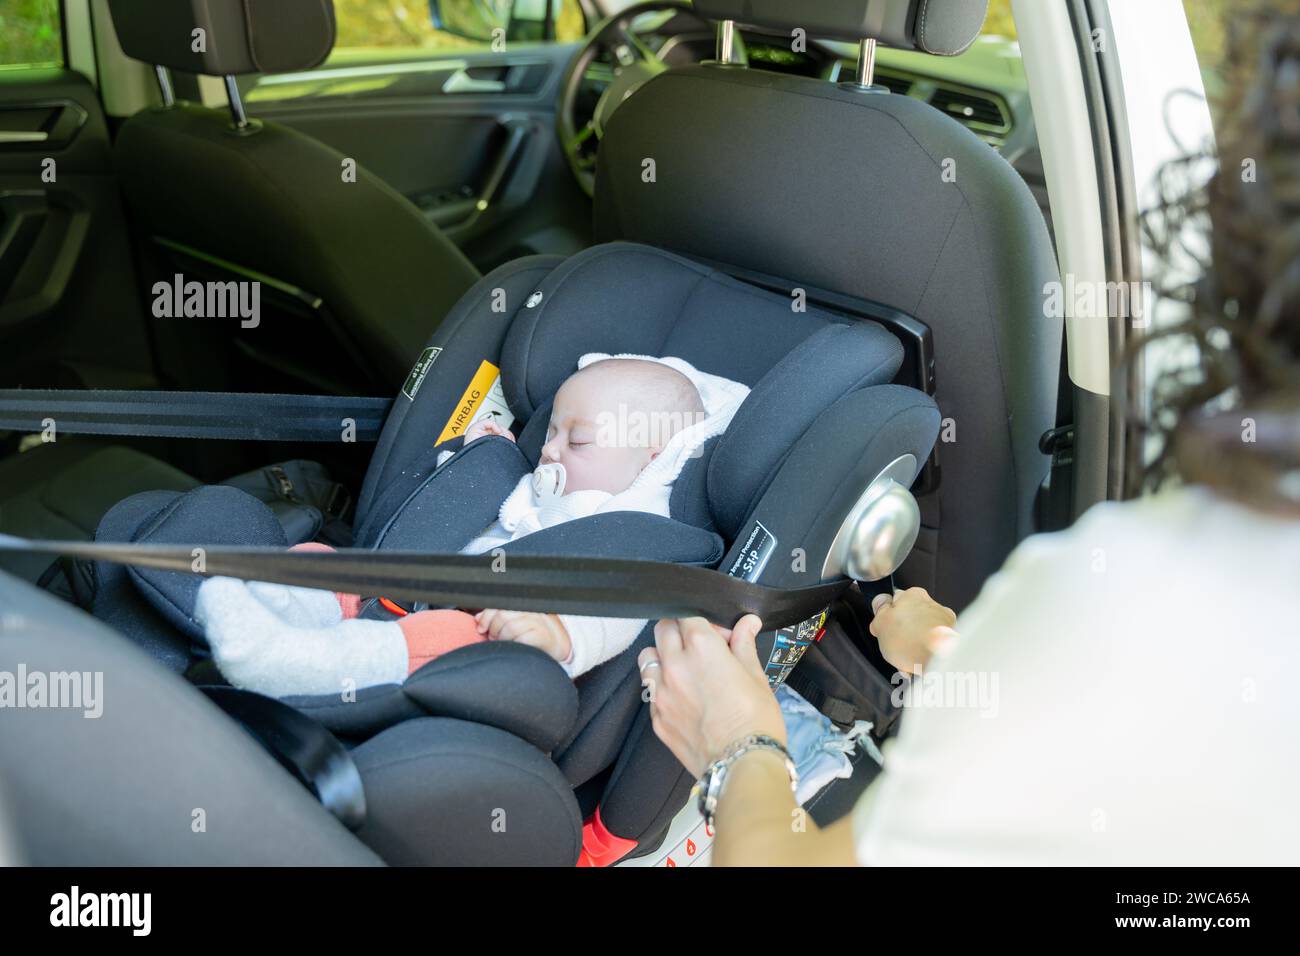 young mother adjusting the seat belt of her baby's transport seat in the car, child restraint system in the vehicle. safety concept in child transport Stock Photo